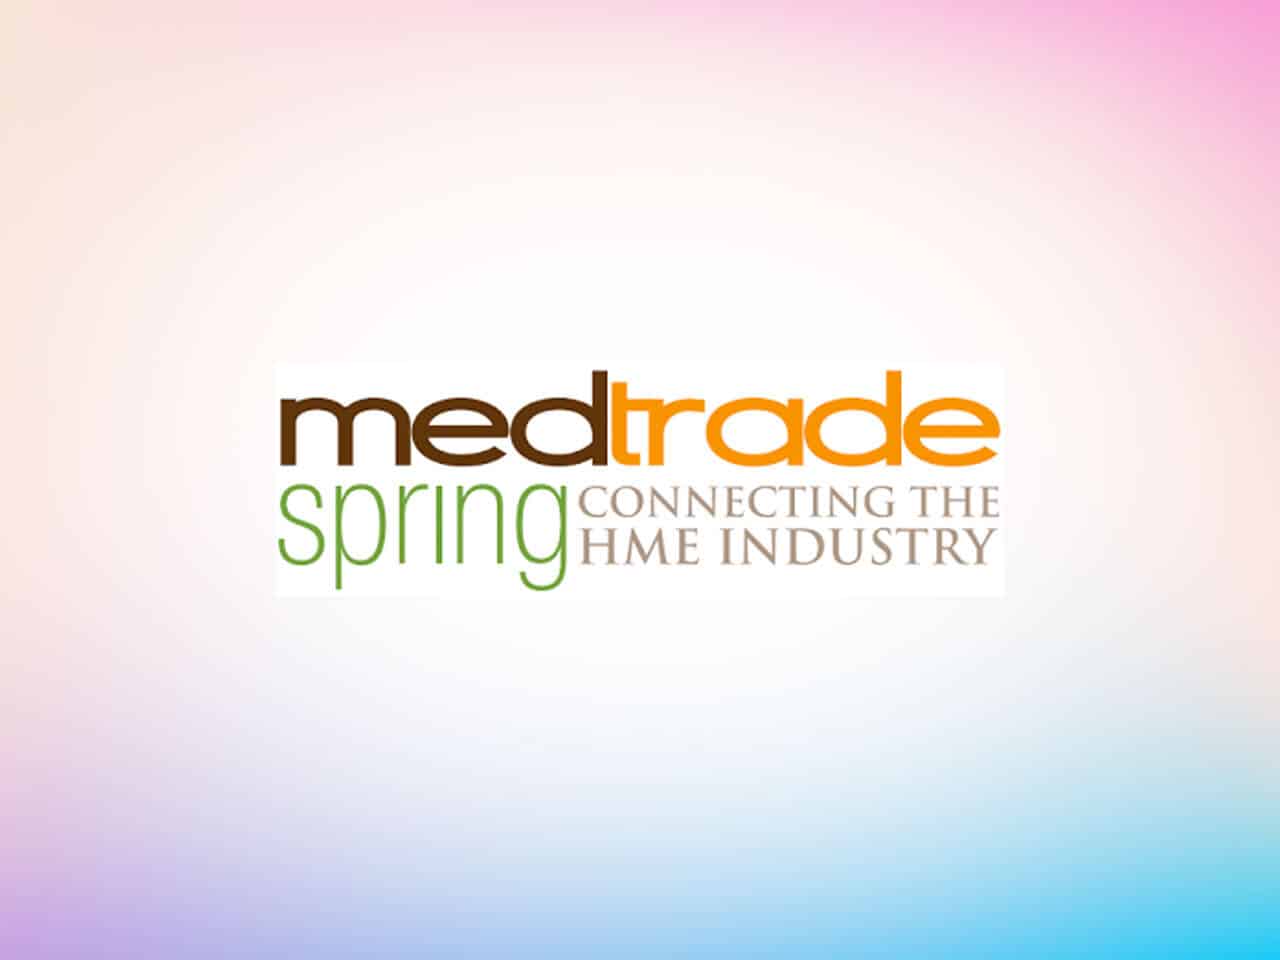 AIROS Medical to Exhibit, Participate in New Product Showcase at Medtrade Spring 2020